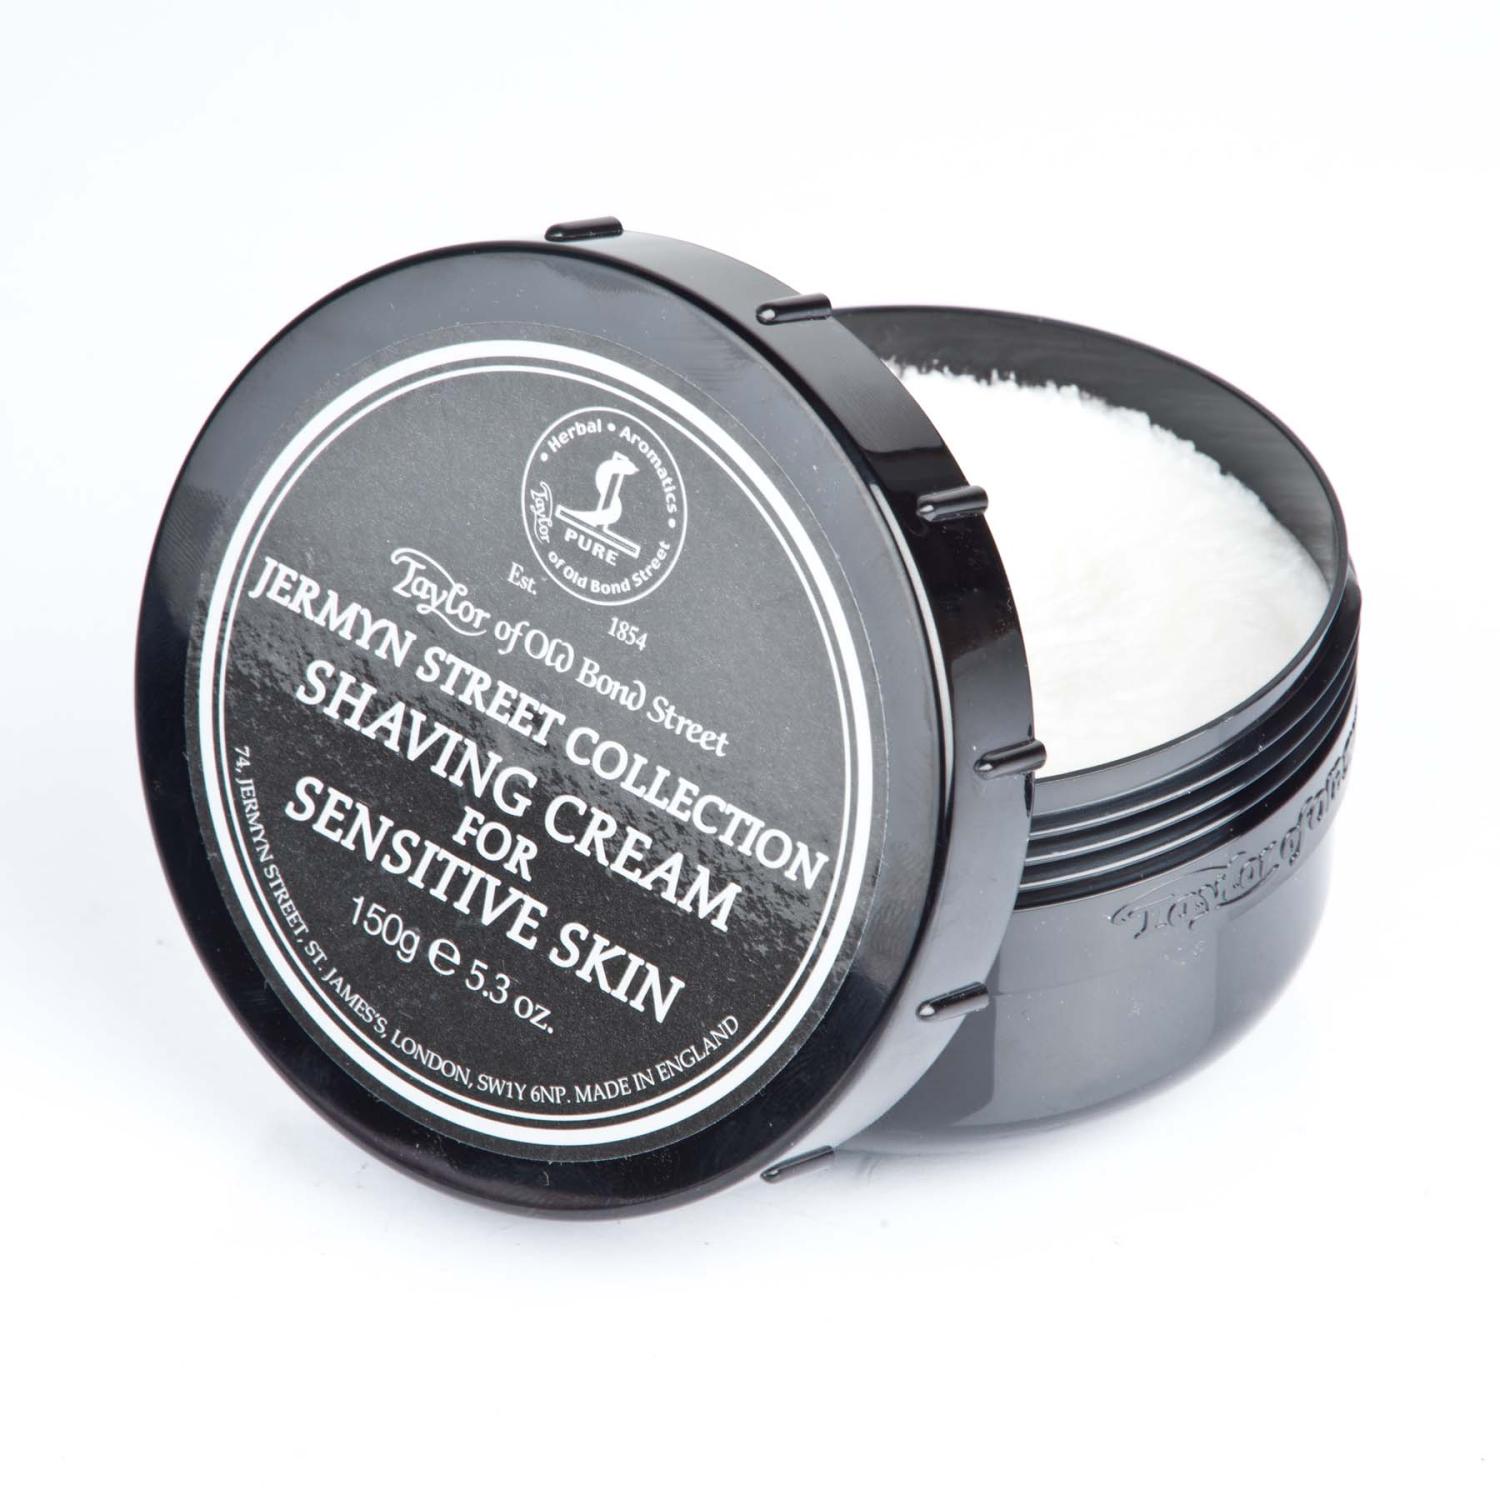 Taylor St James Collection luxury Shaving Cream